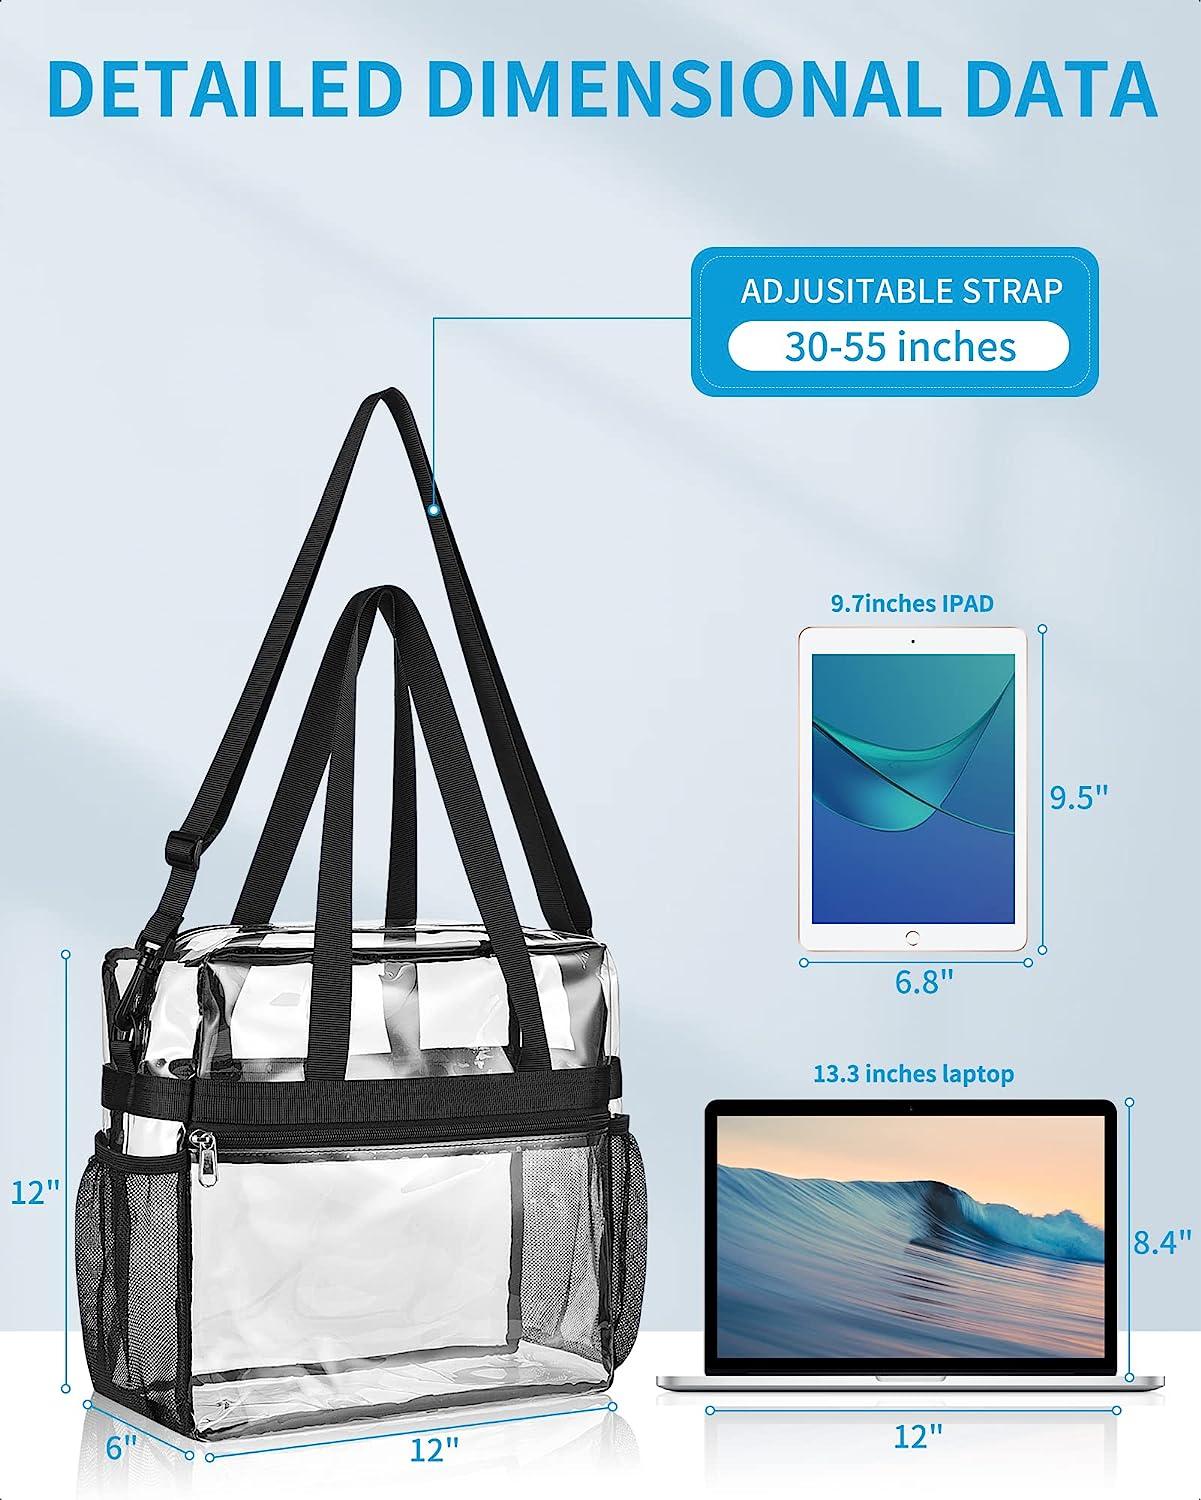 Clear Bag Stadium Approved,Security Approved Clear Tote Bag-12X12X6